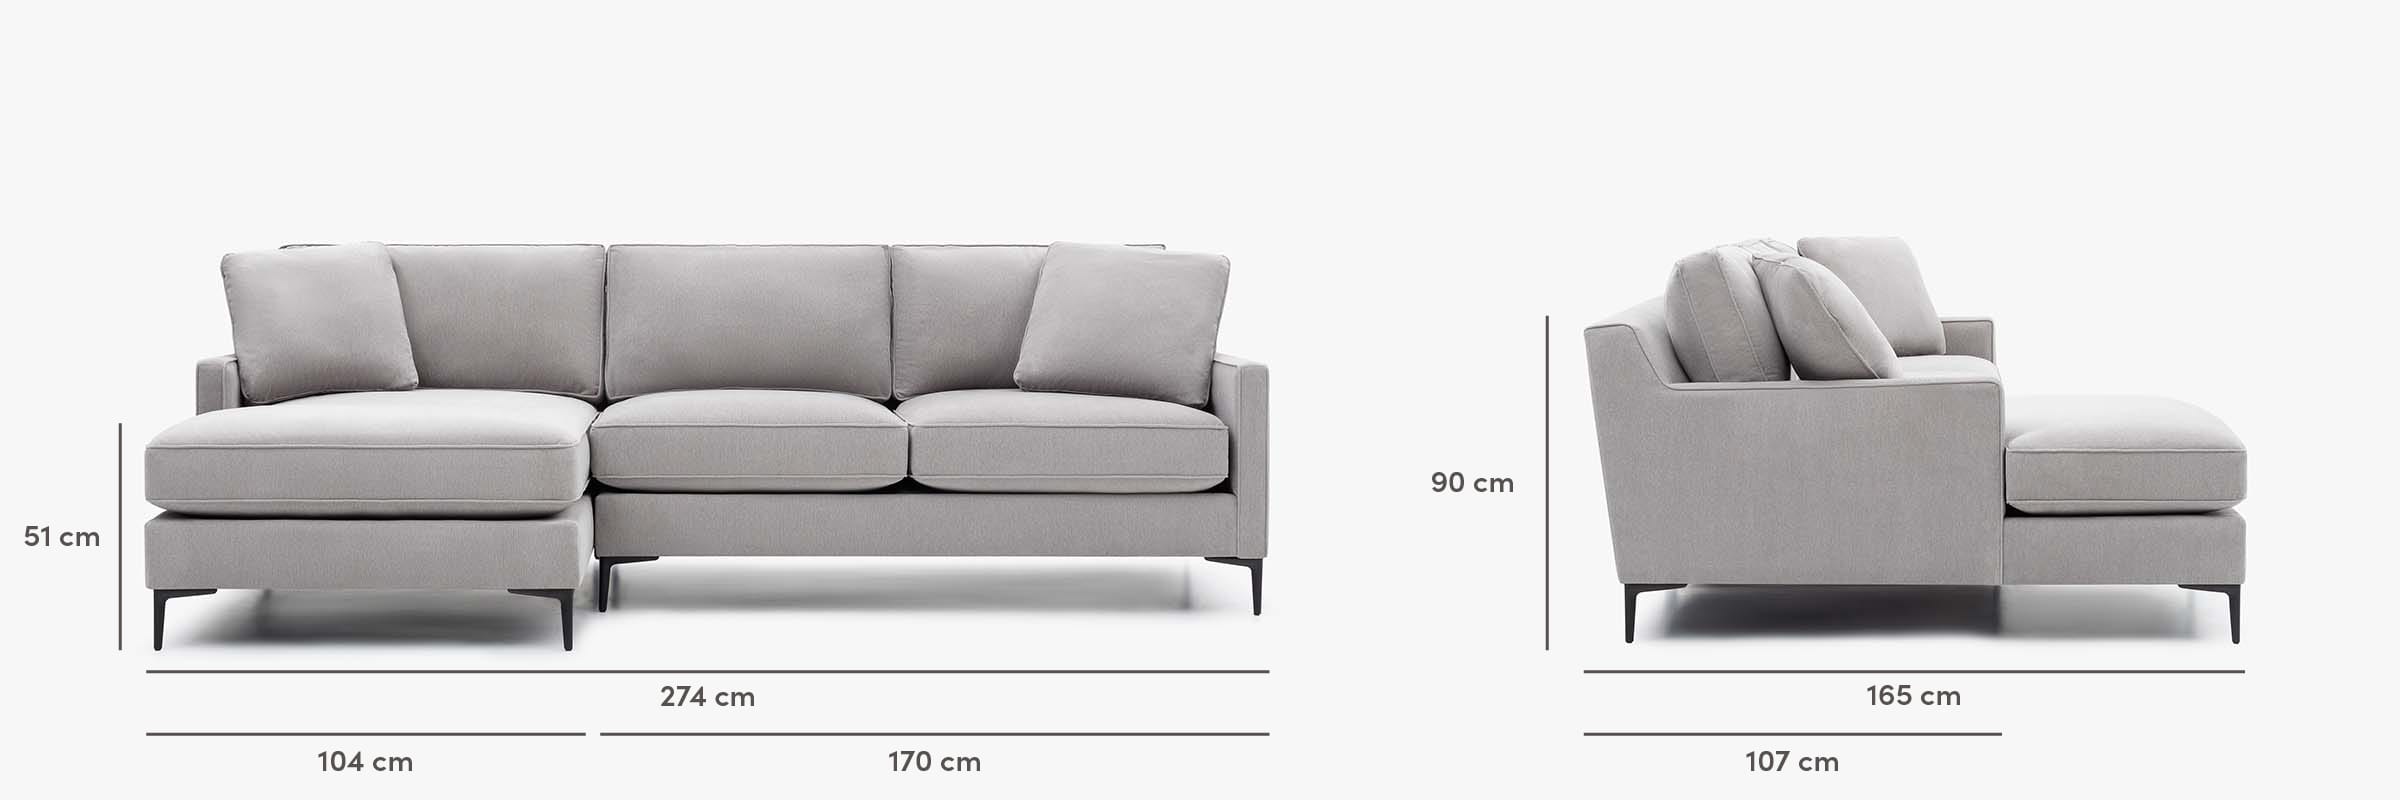 Kennedy sectional dimensions